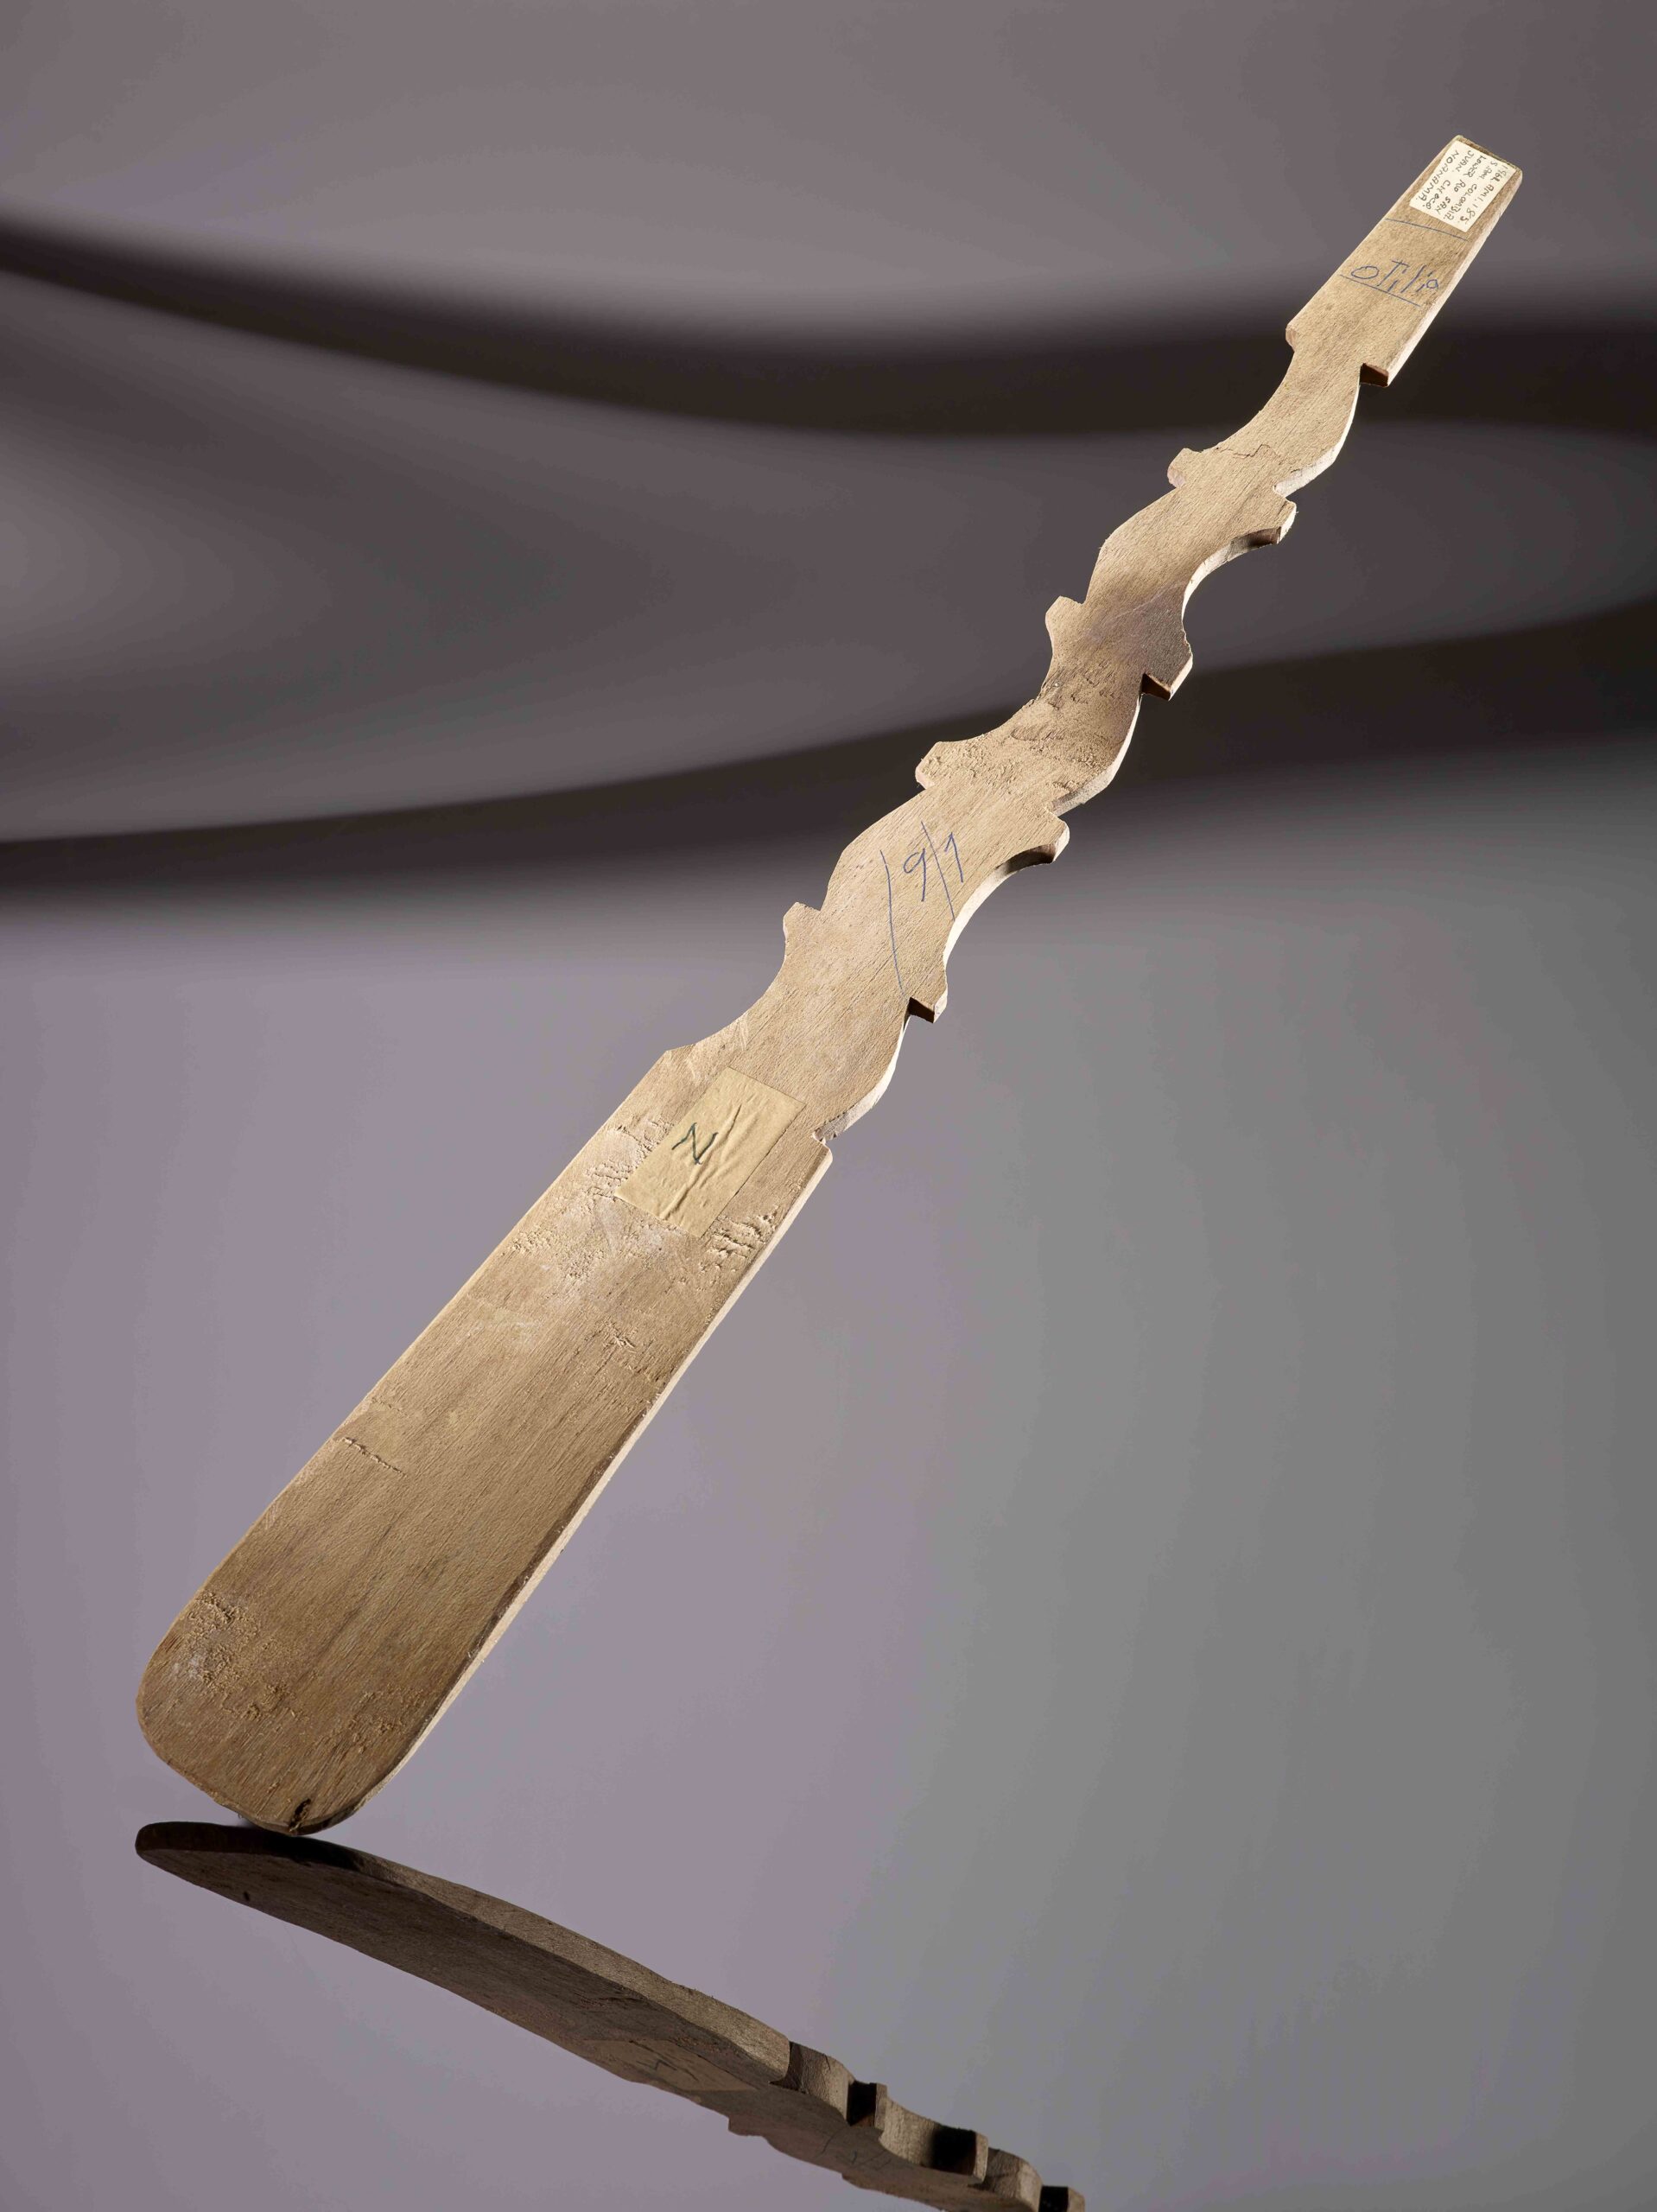 Wooden spoon (Am1962,01.185) ©Trustees of The British Museum